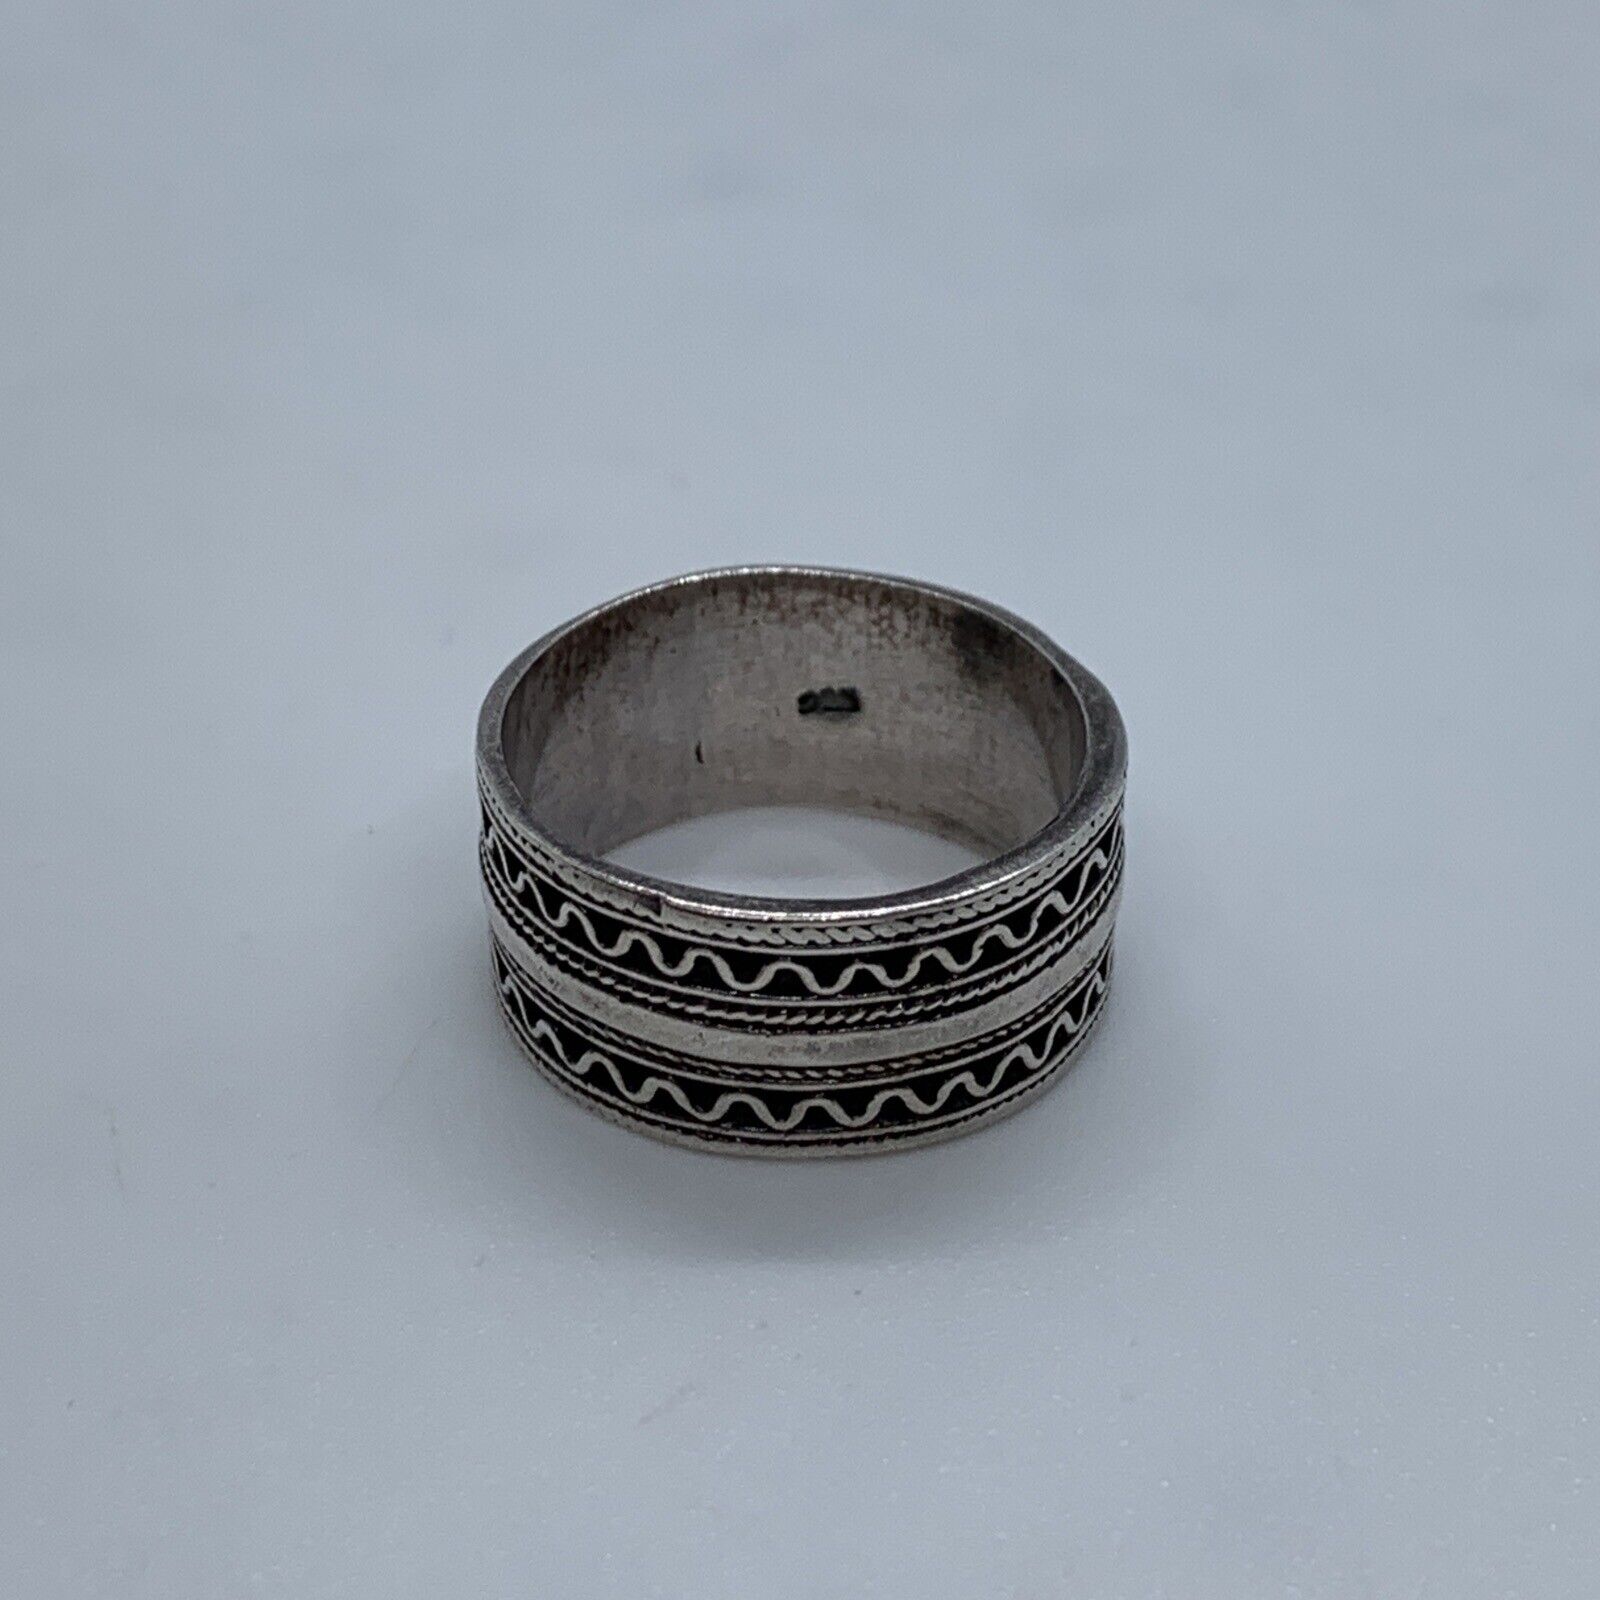 Vintage Sterling Silver Stamped Band Ring Size 7